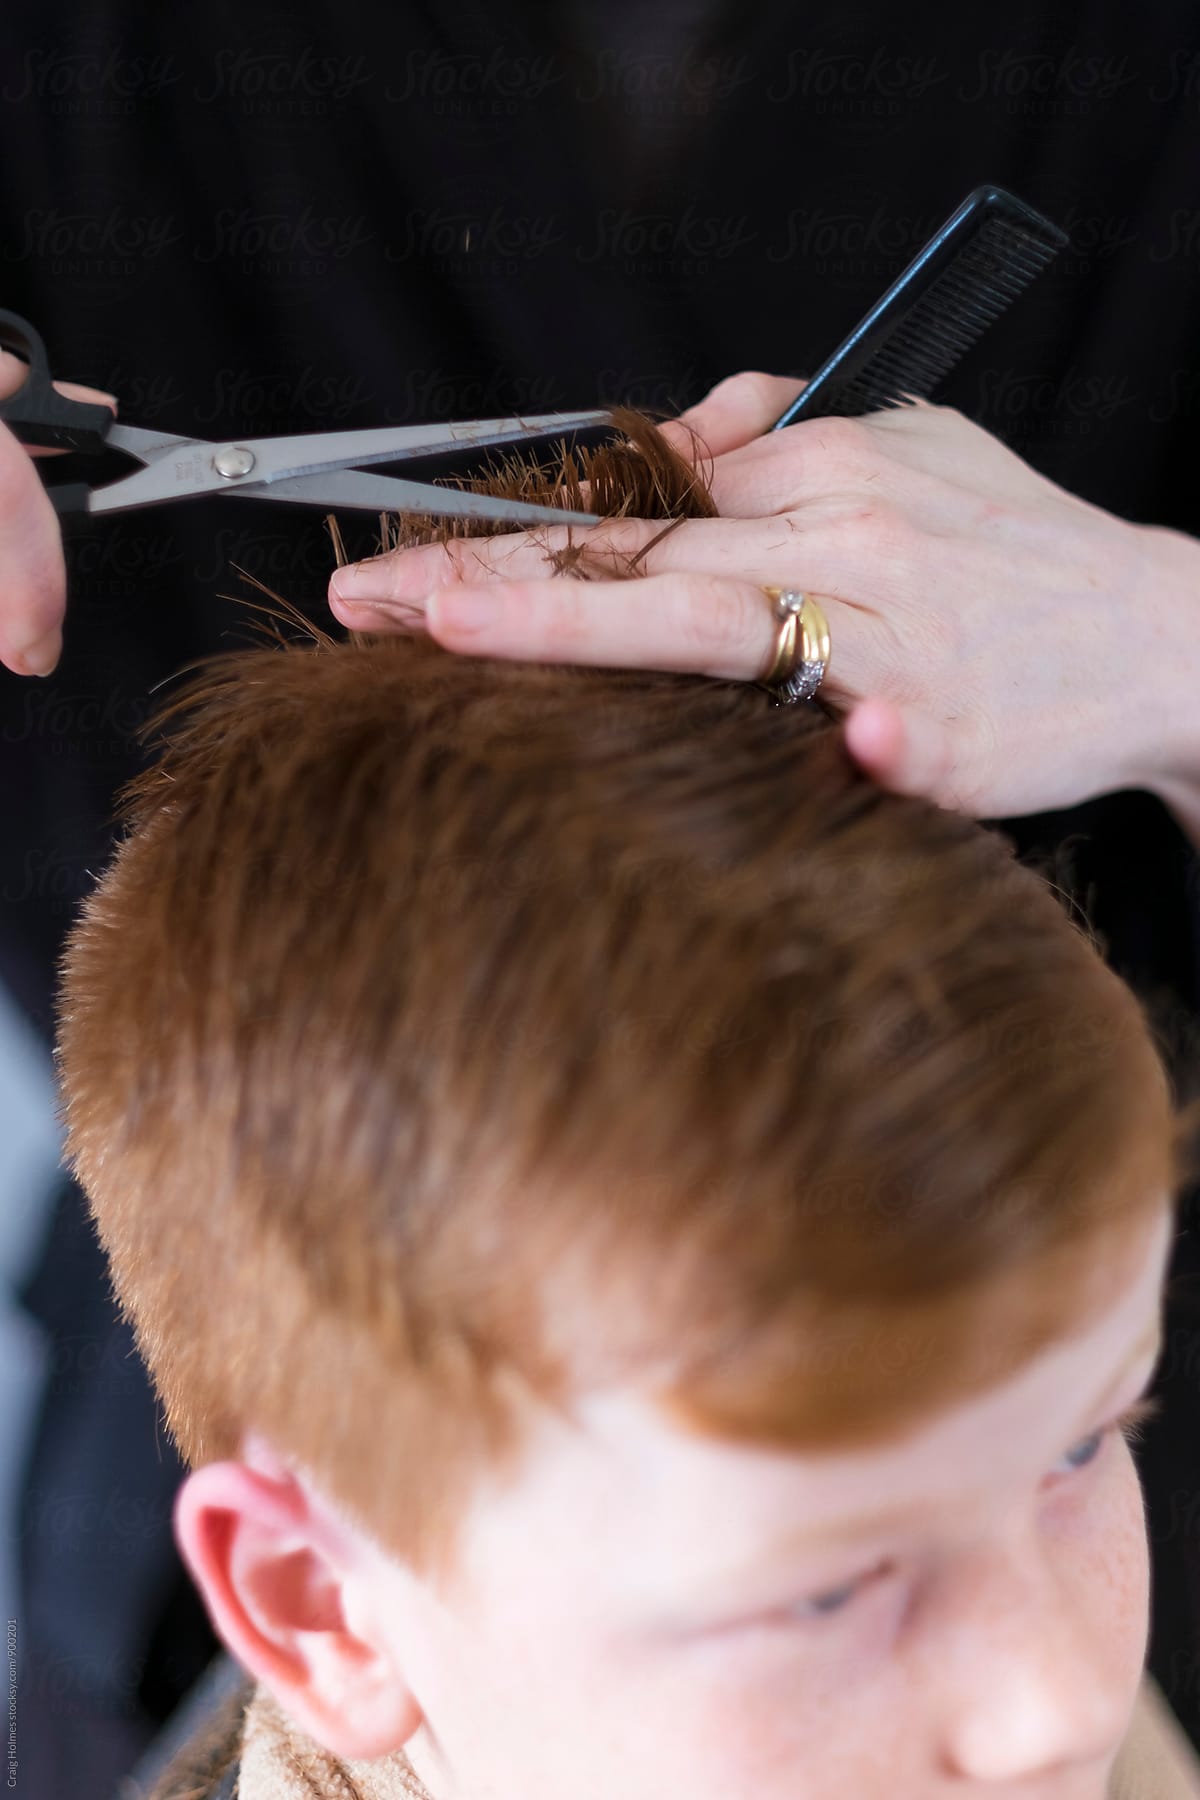 A boy having his hair cut with clippers and scissors.